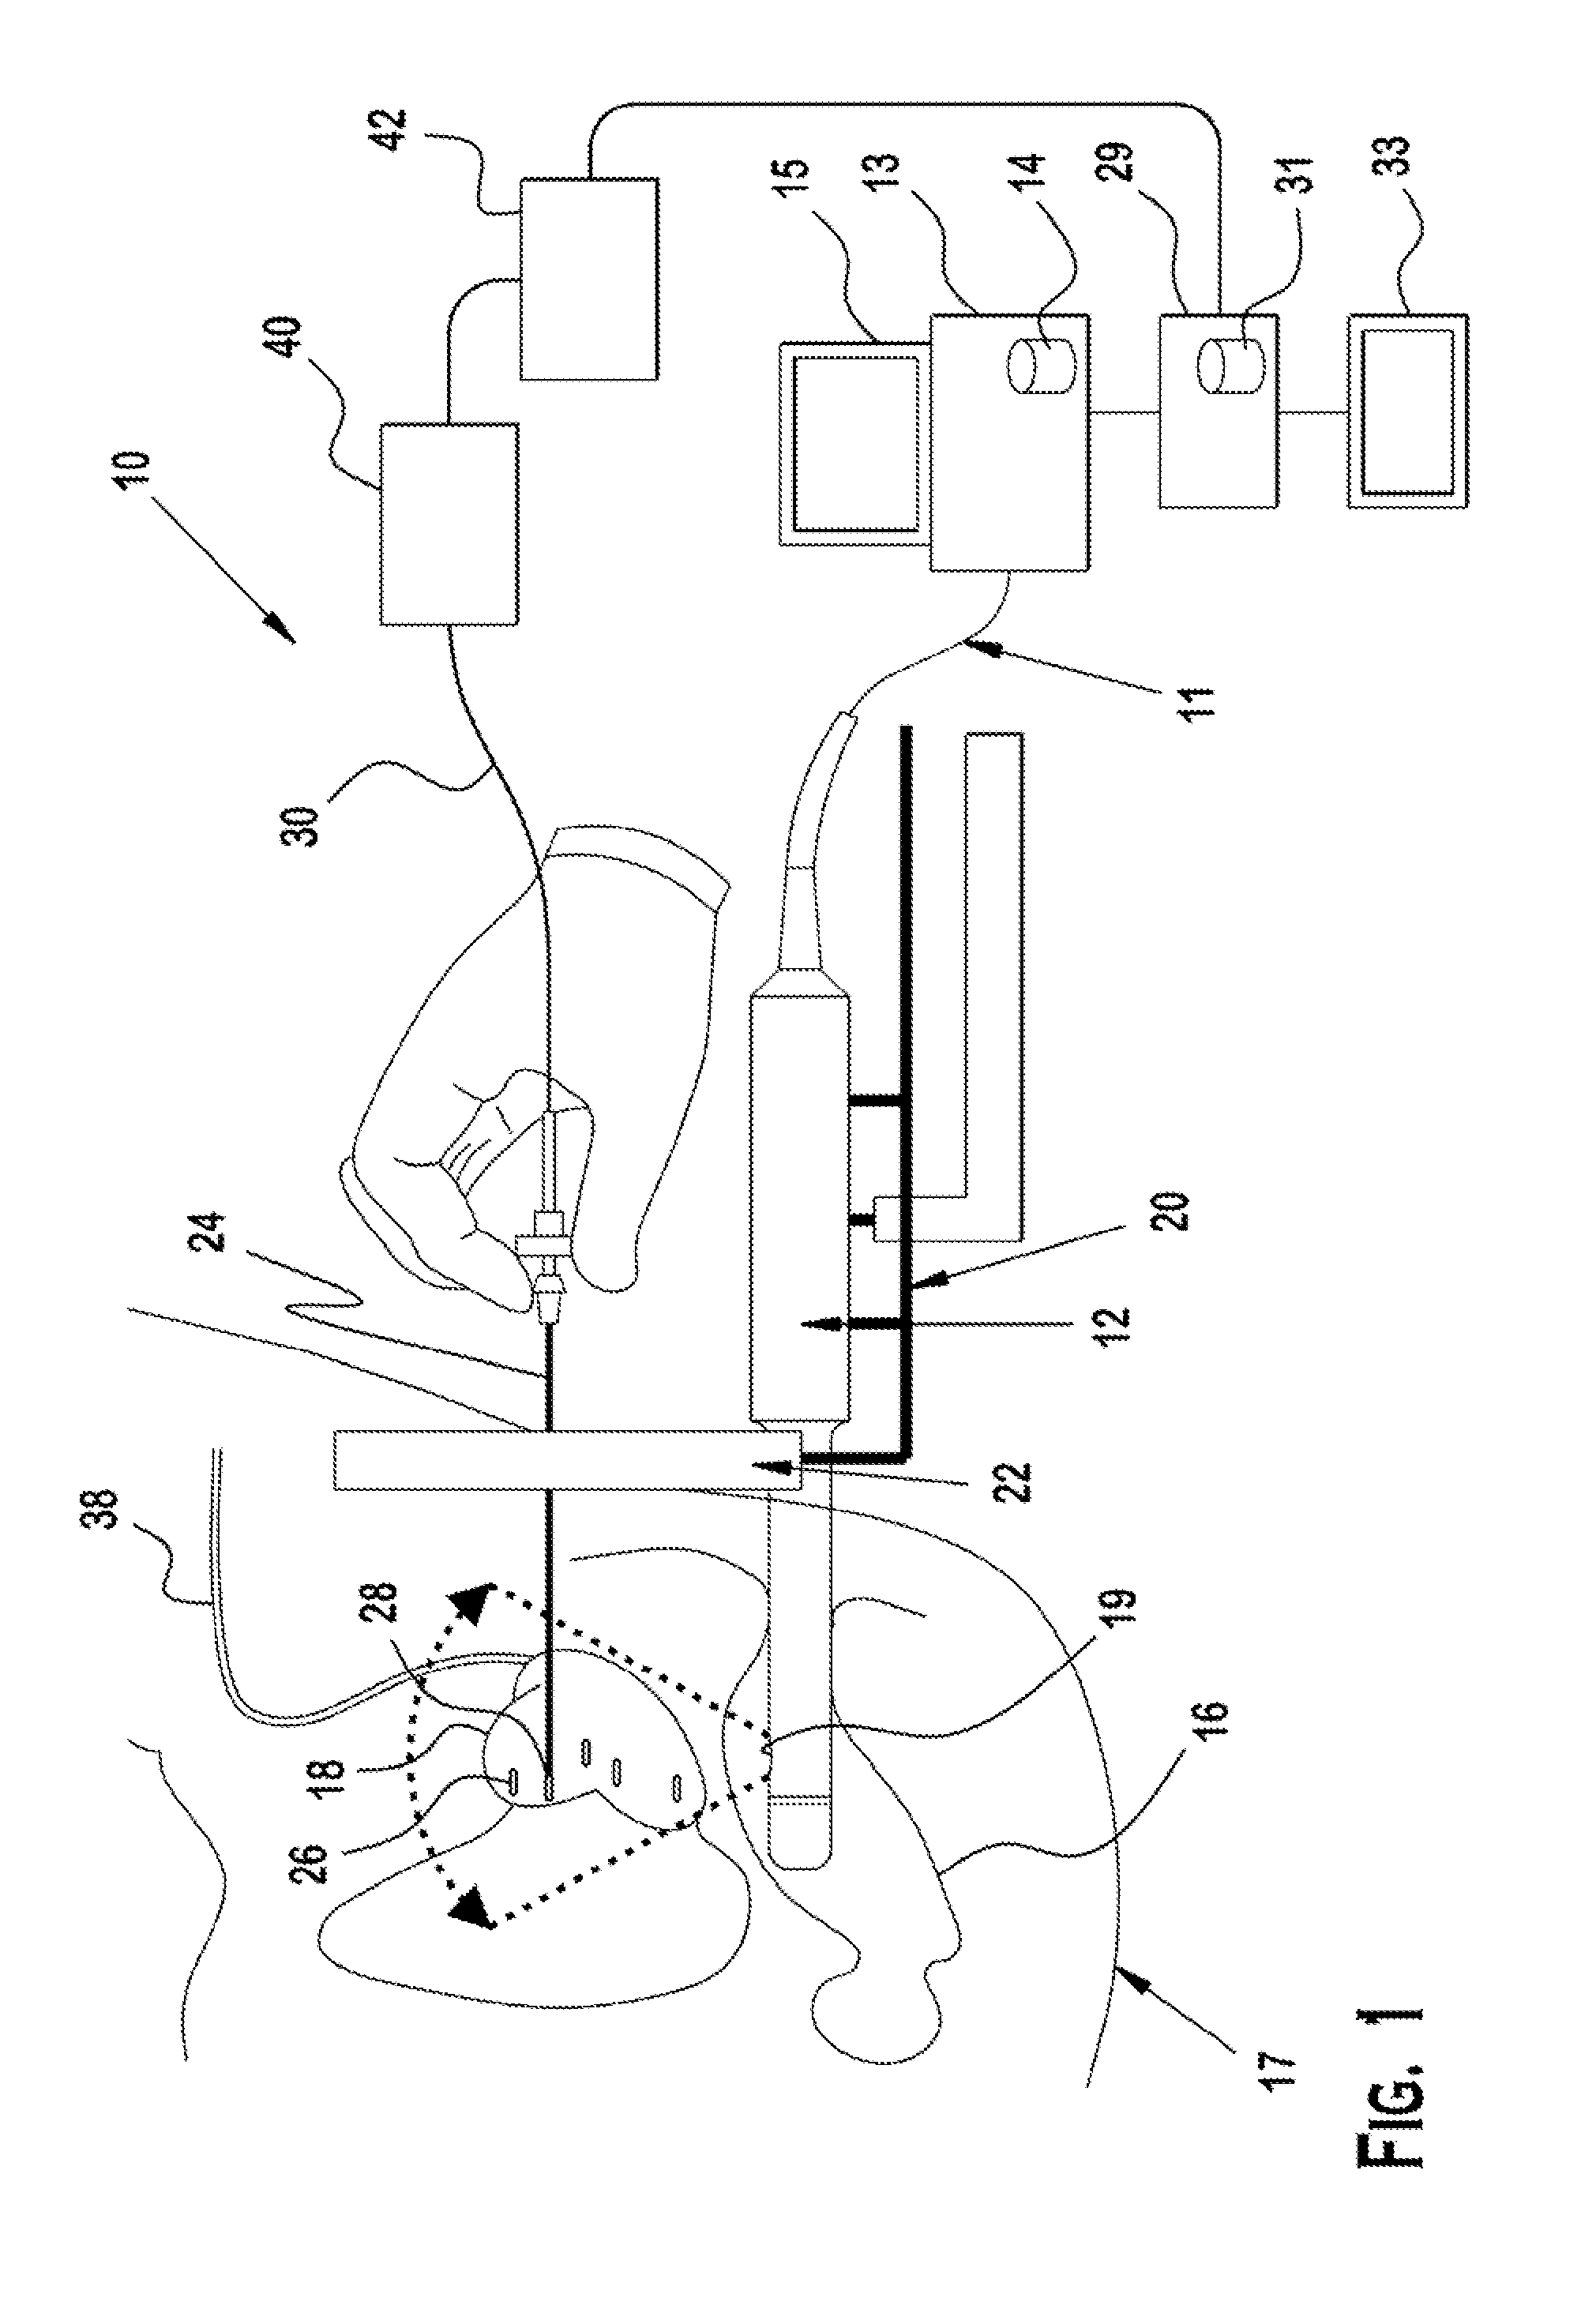 Interventional photoacoustic imaging system